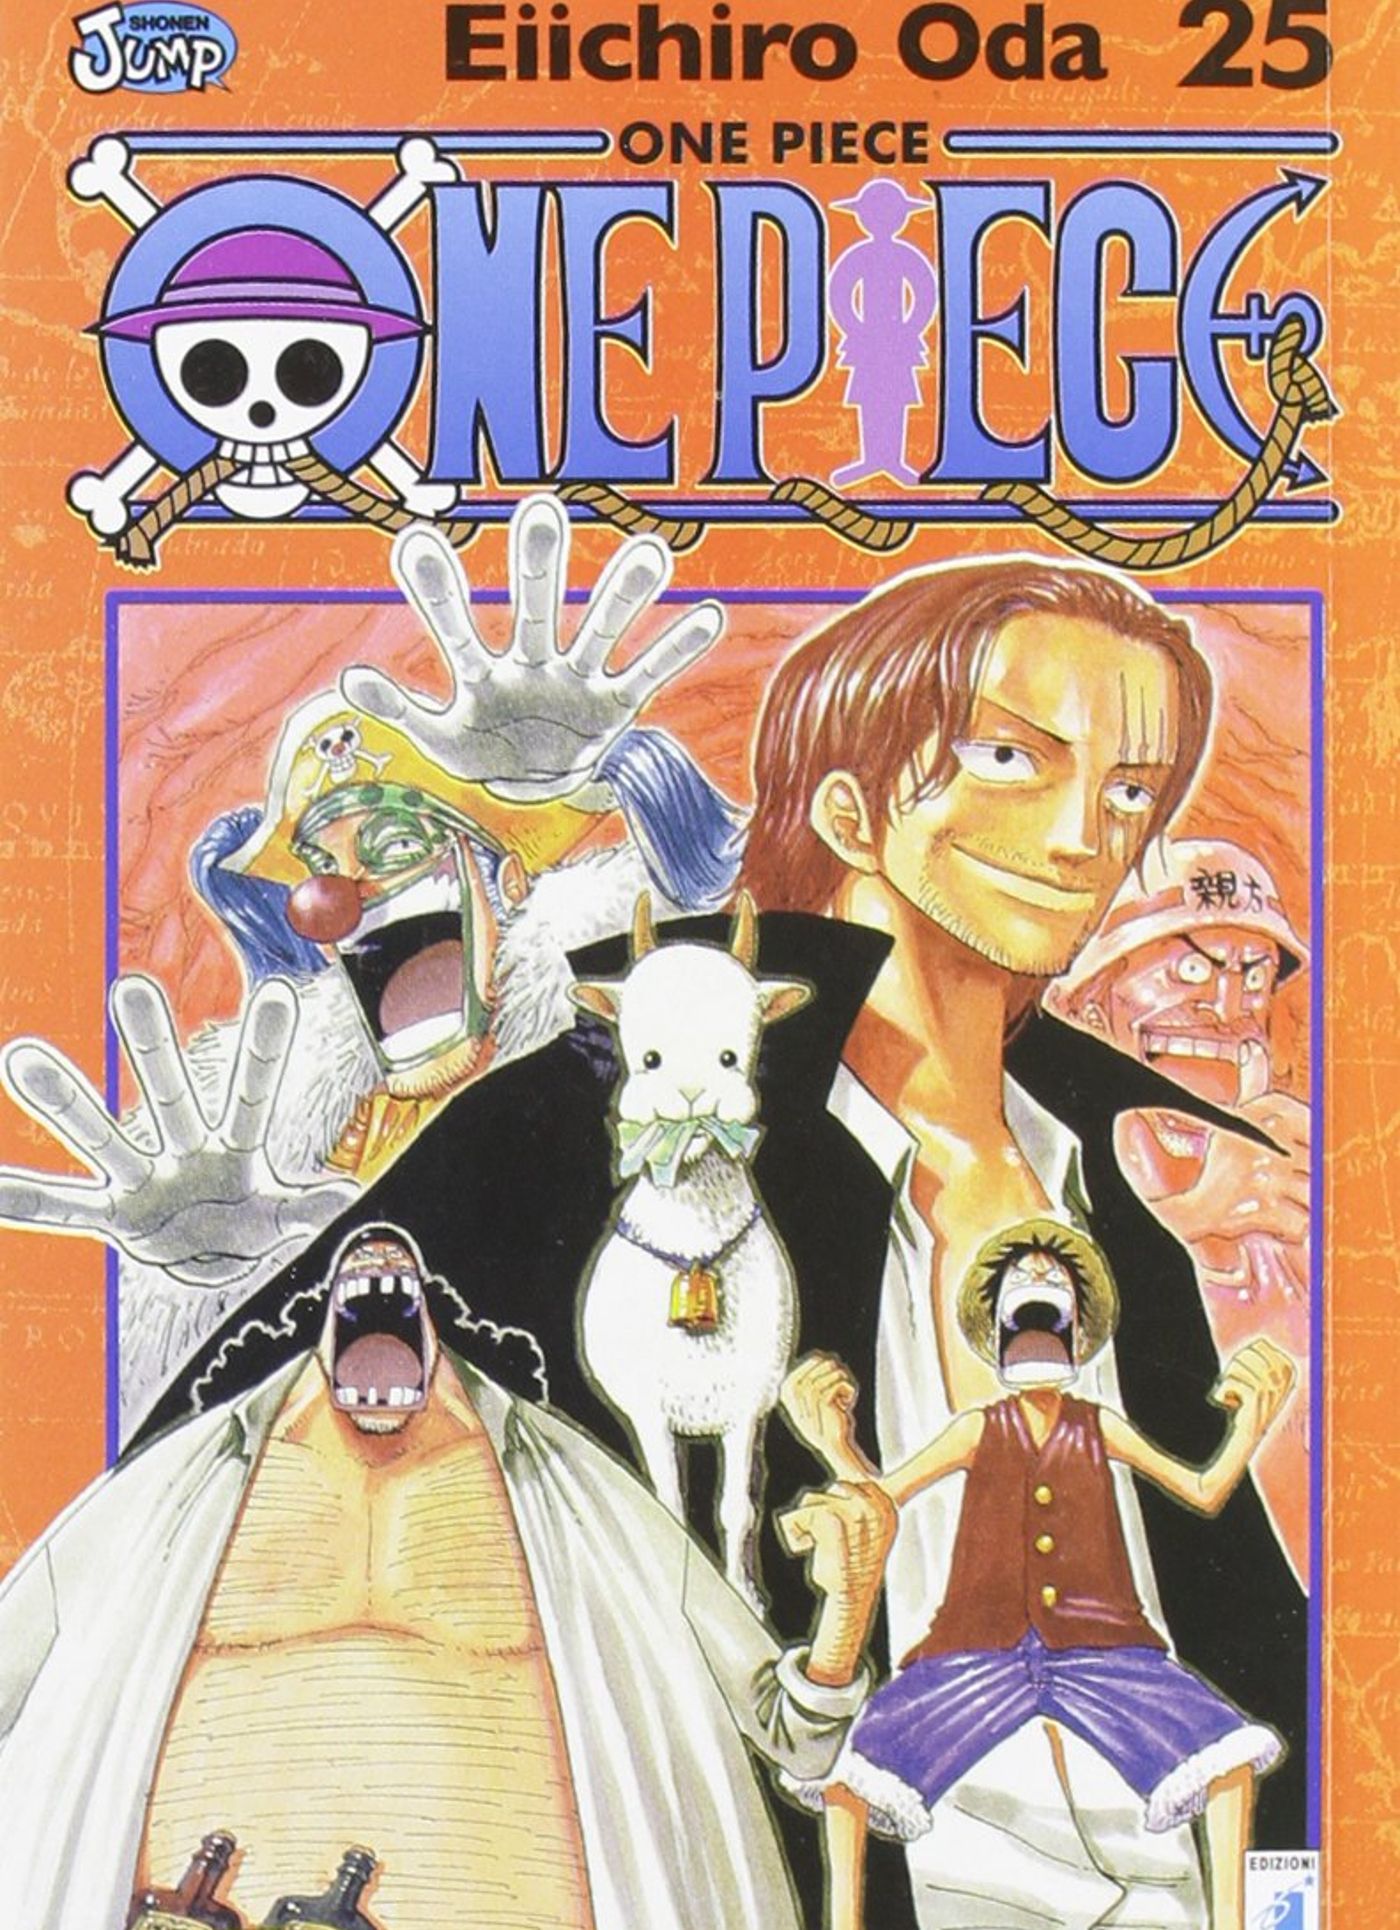 One Piece volume 25 cover image